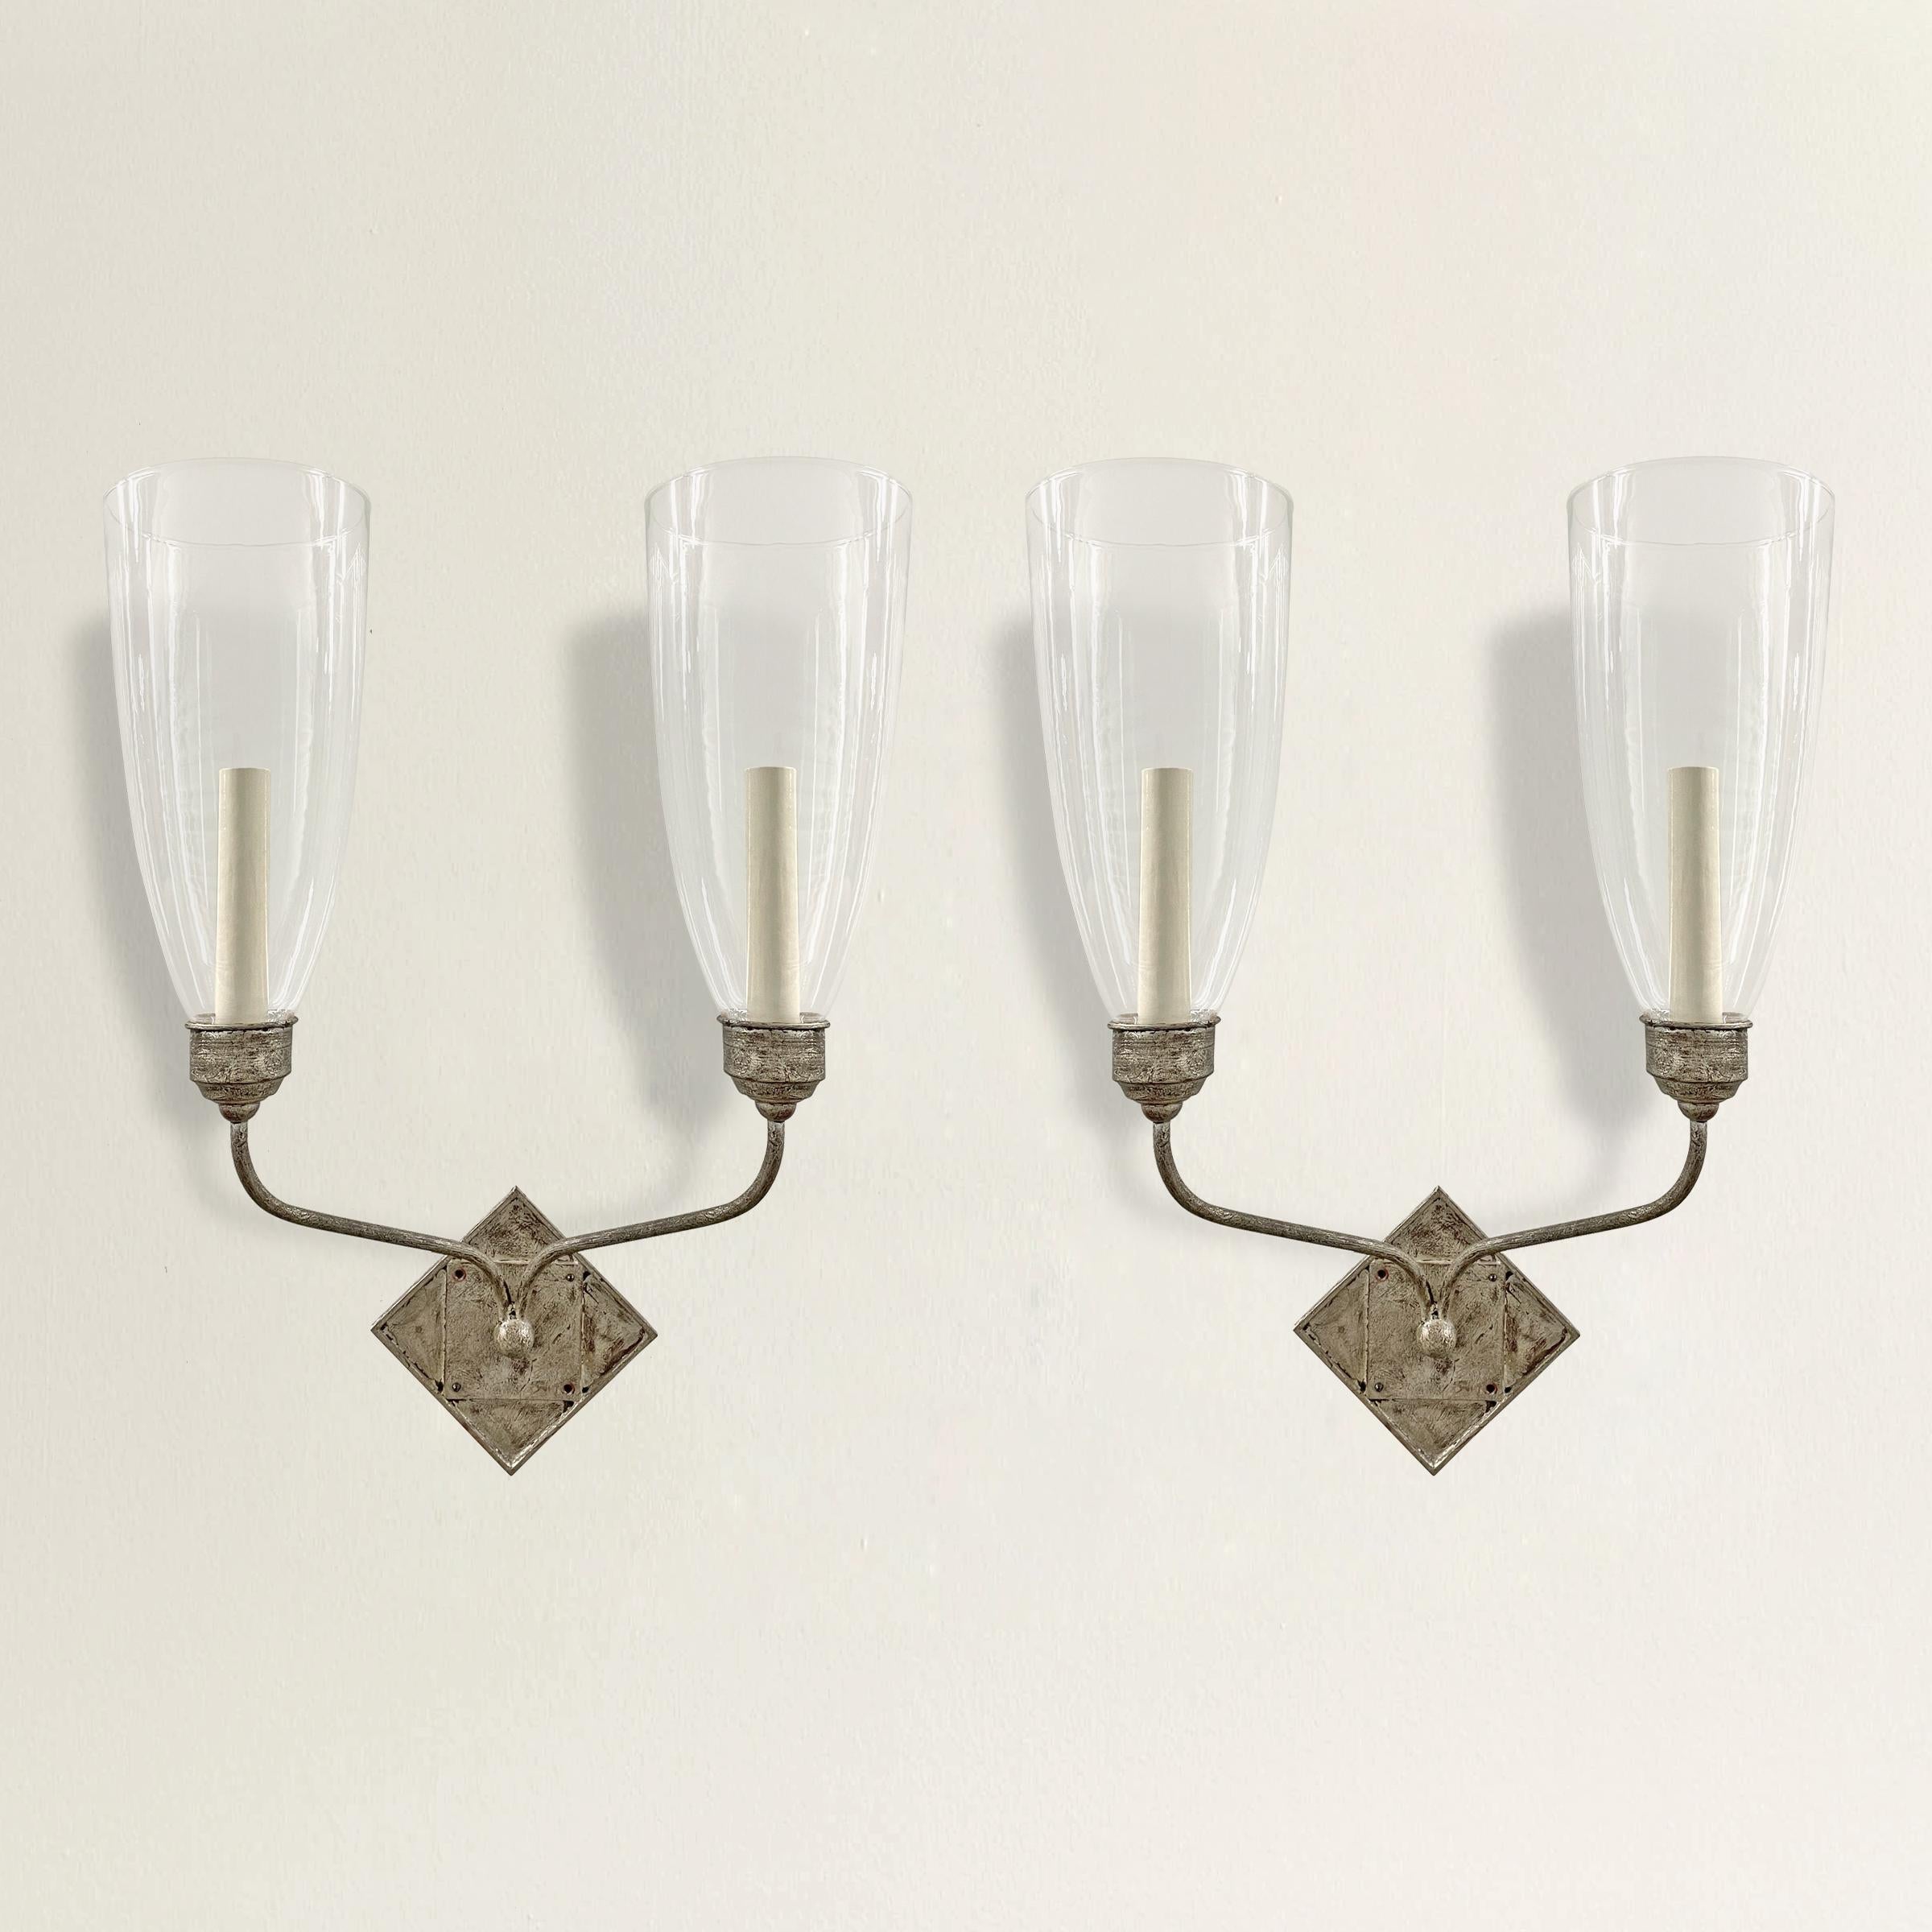 A pair of two-arm sconces with diamond backplates, a silver-leaf finish, and each with two tall blown glass hurricanes. Wired for US; candelabra bulbs.